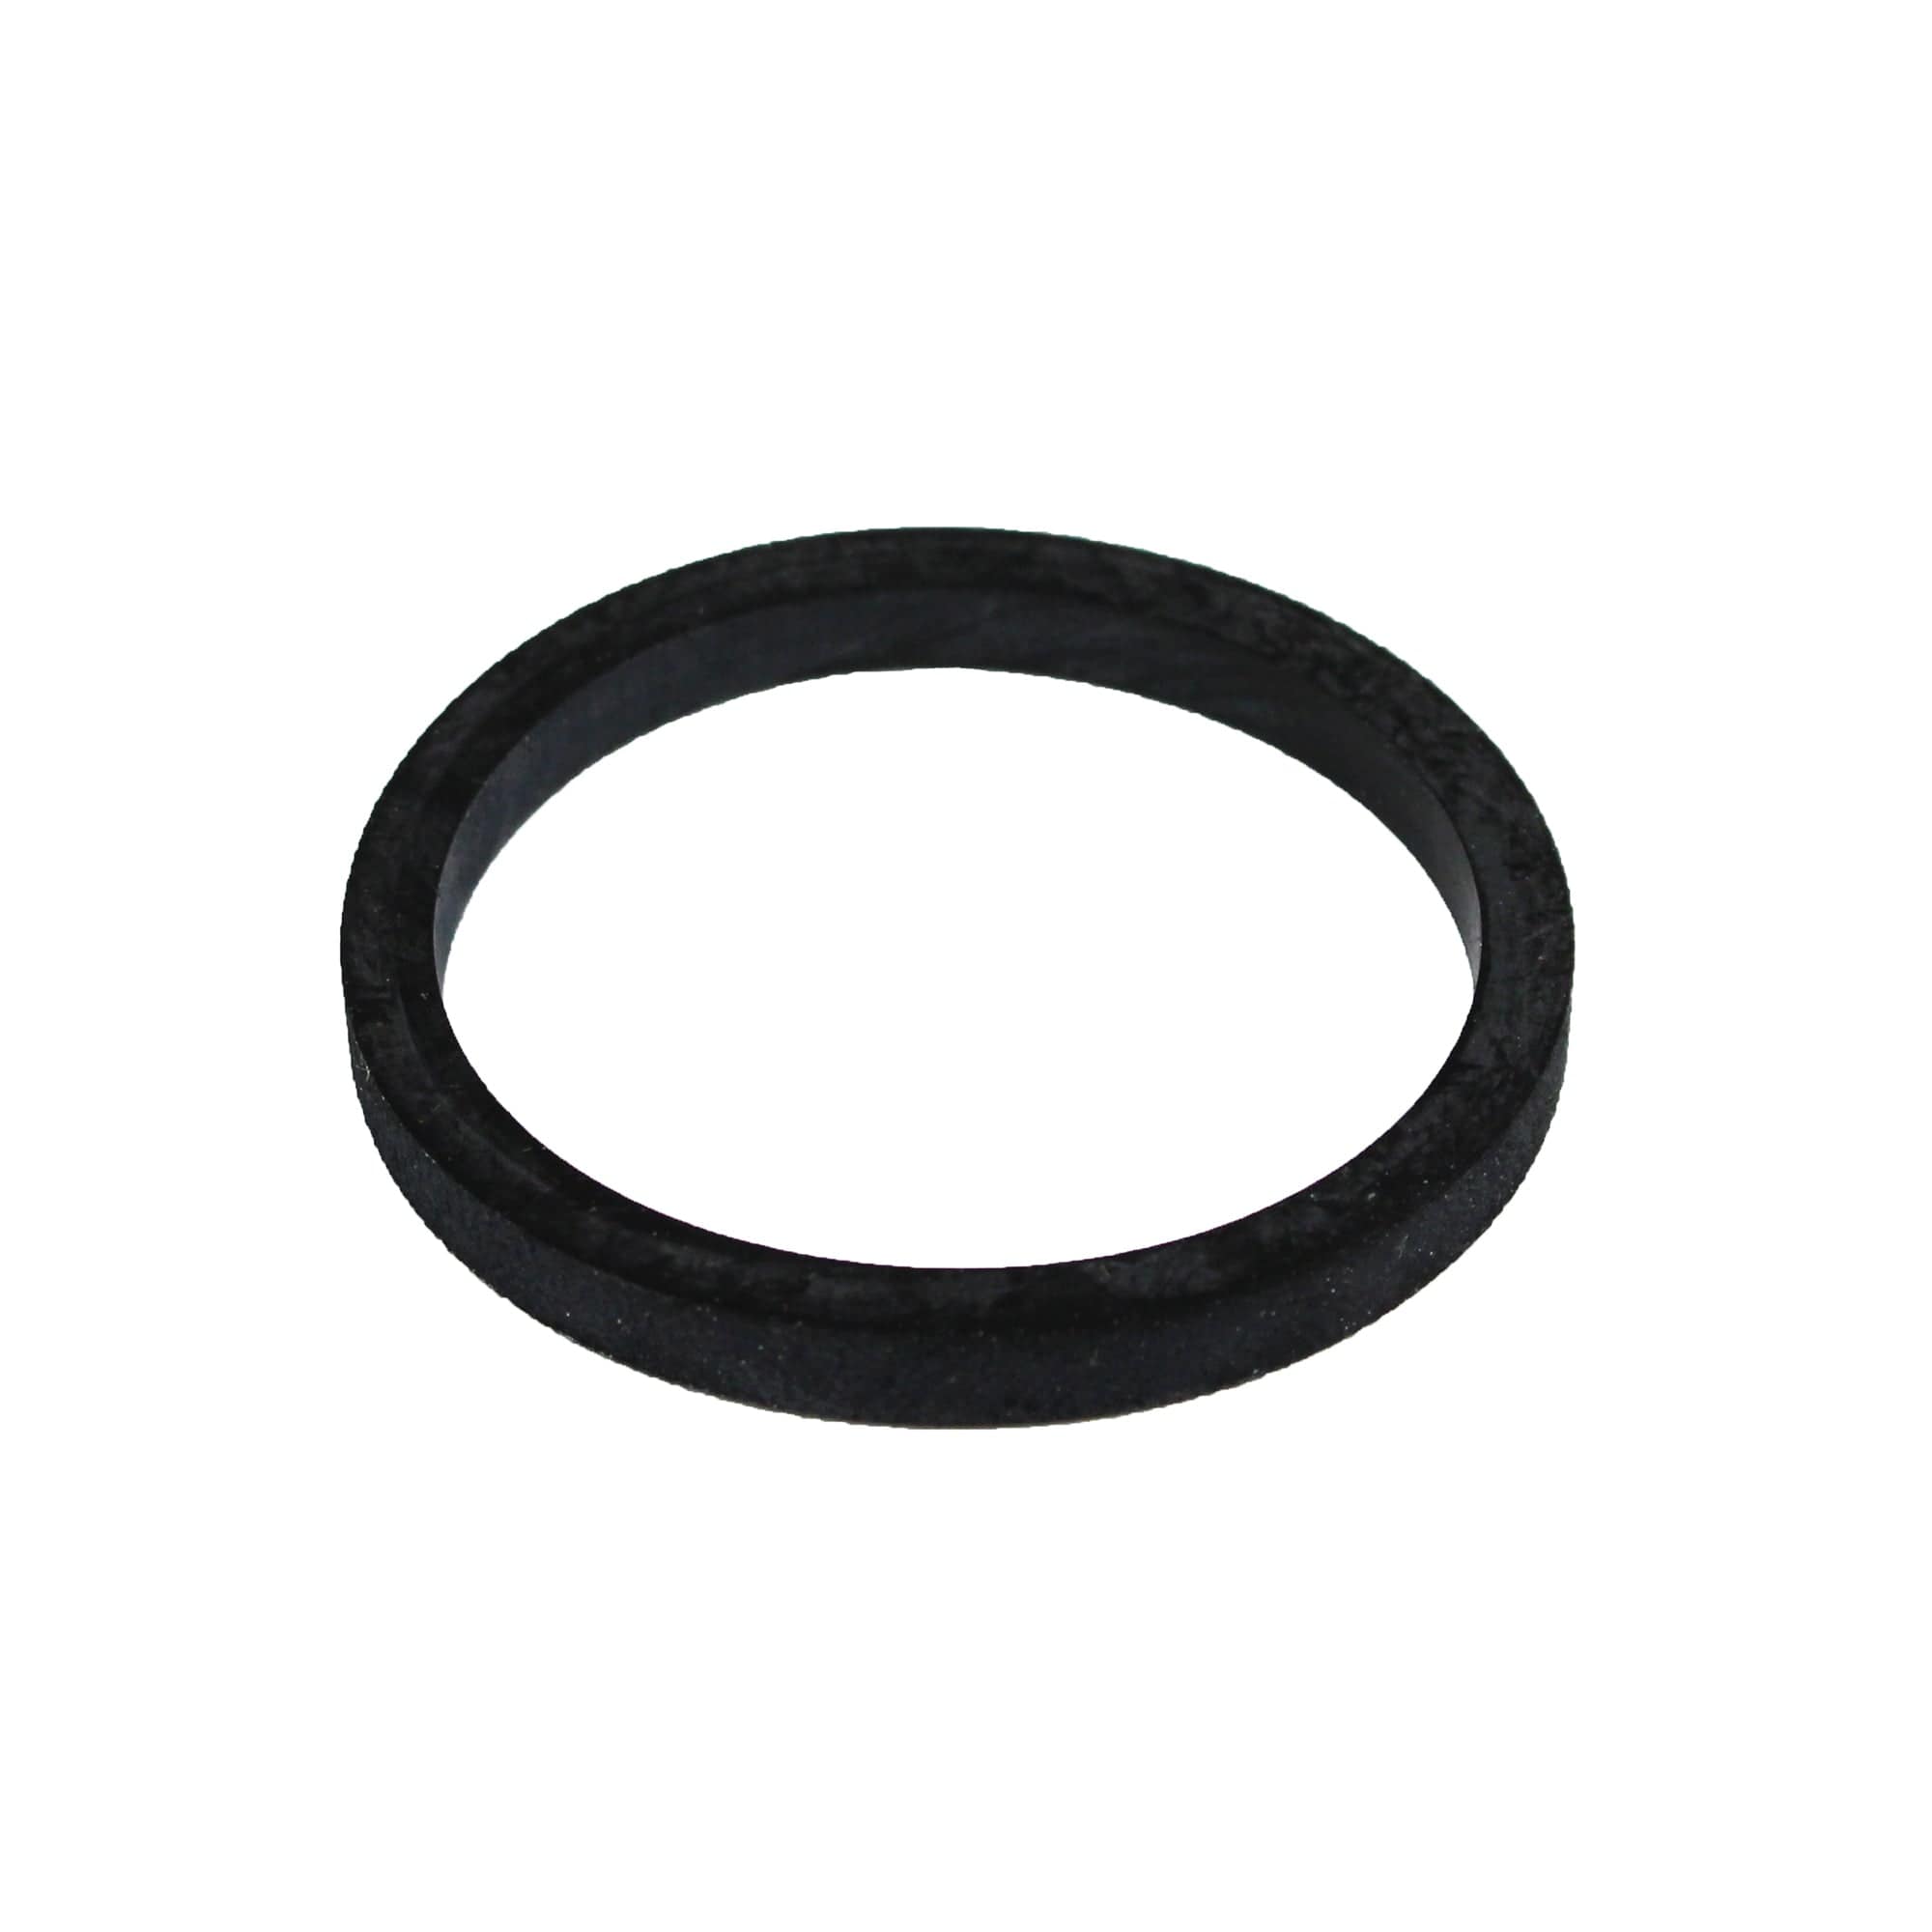 Camco 06822 Water Heater Gasket - Screw in Element 1.425" OD 1.225" ID .165" Thick O-Ring